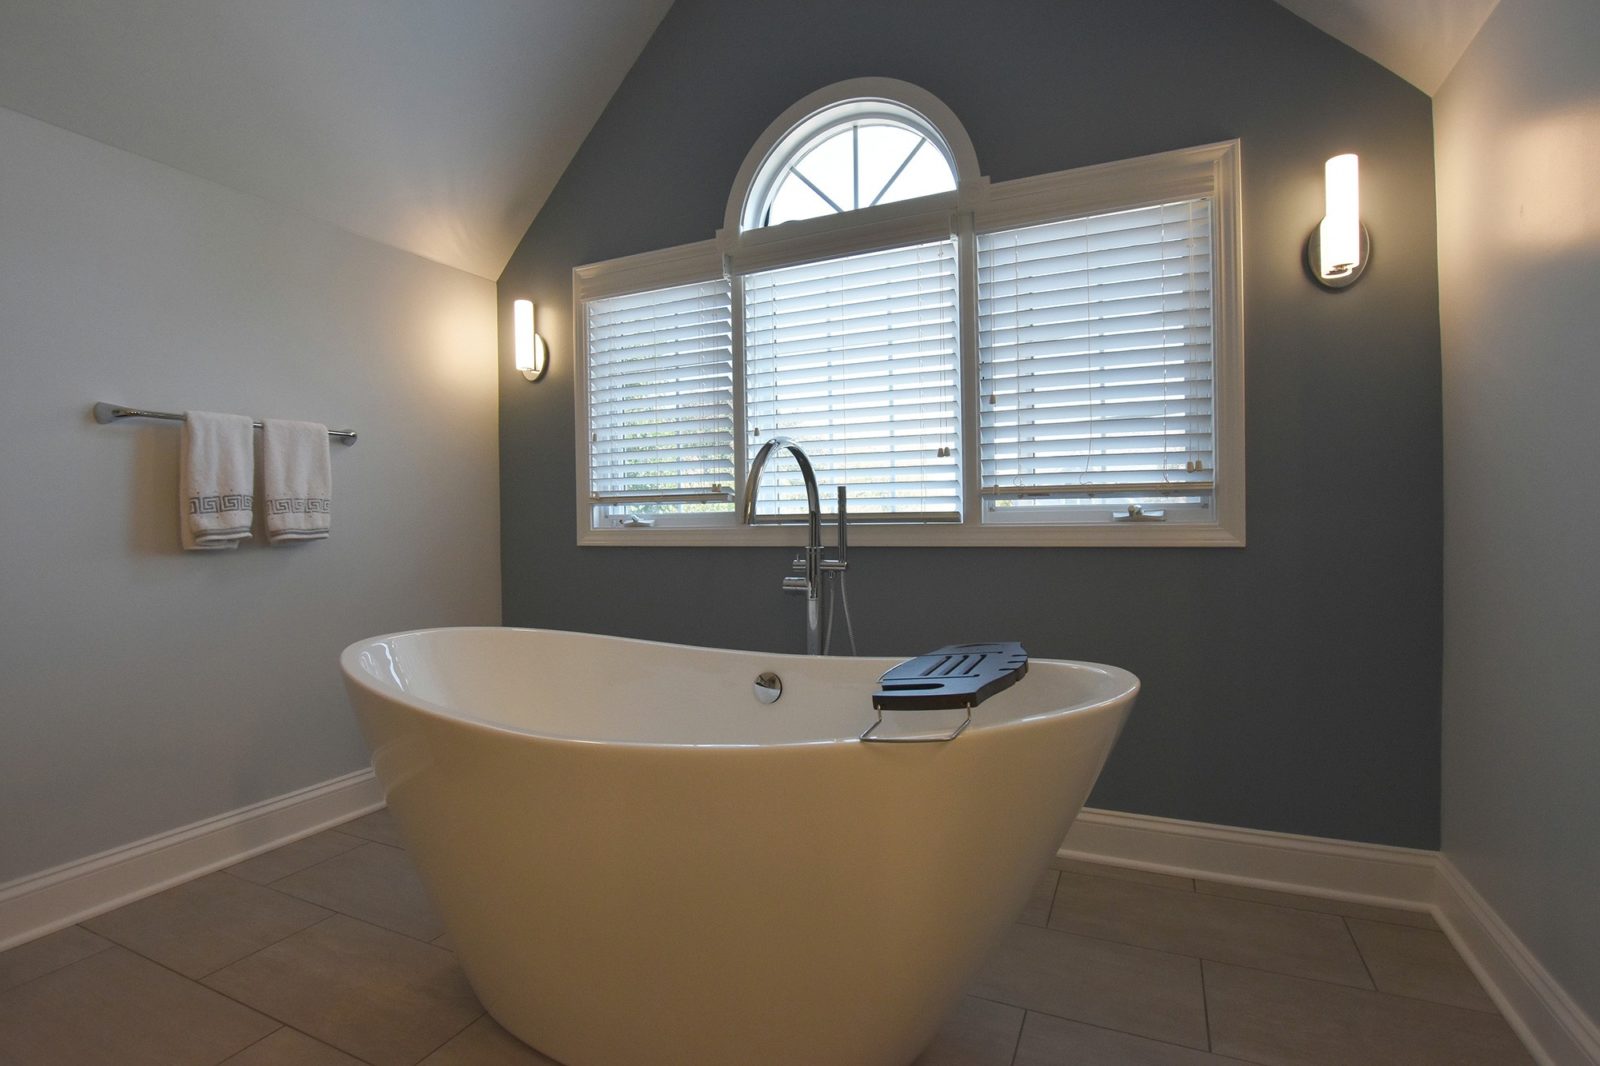 Free-standing white bathtub in a bathroom with windows behind it